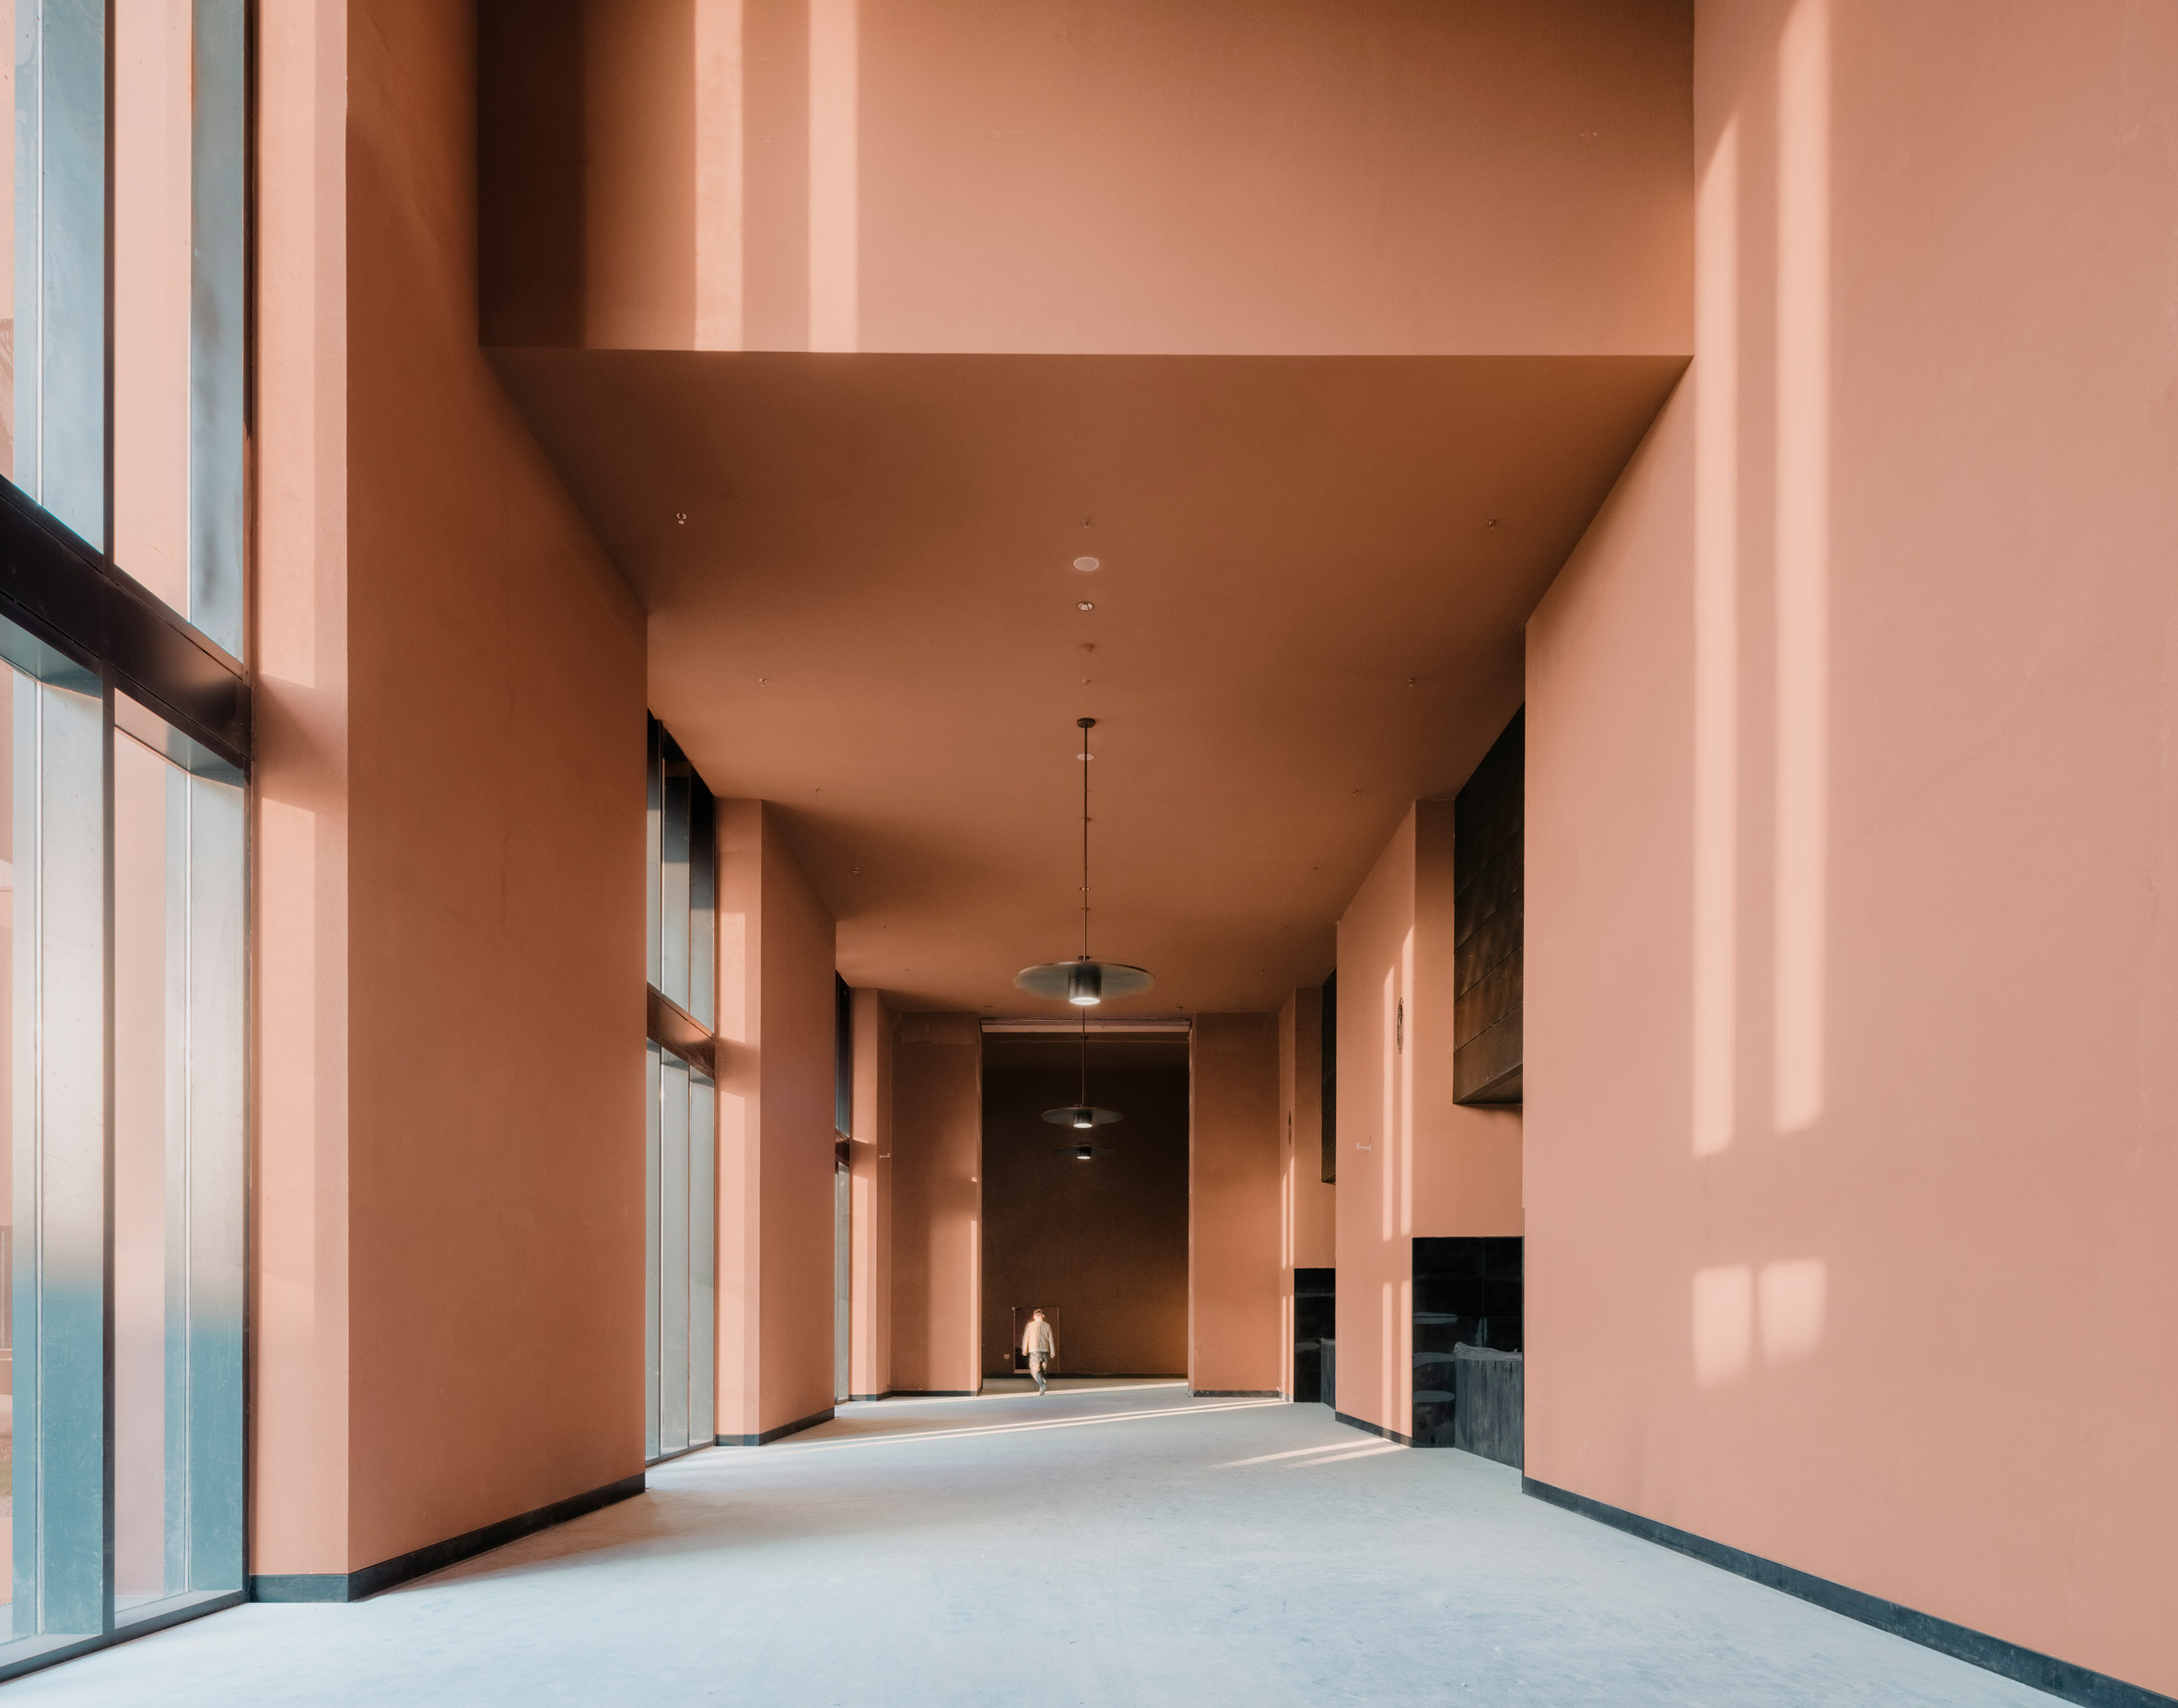 Zhejiang museum, designed by David Chipperfield Architects